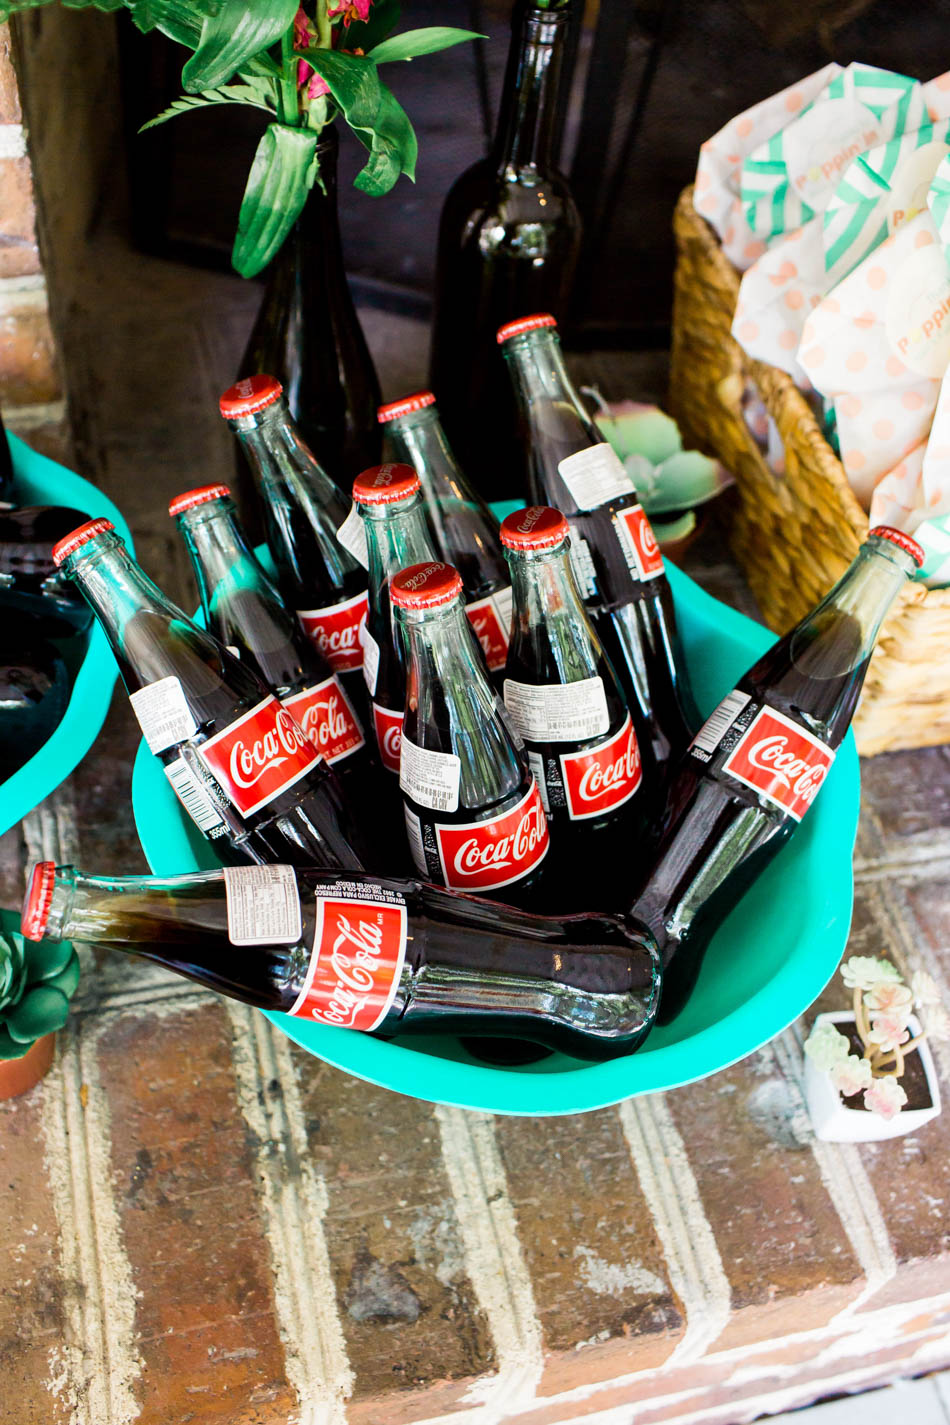 Classic coke bottles sit in a bucket, I'on Creek Club, Mt Pleasant, South Carolina. Kate Timbers Photography. http://katetimbers.com